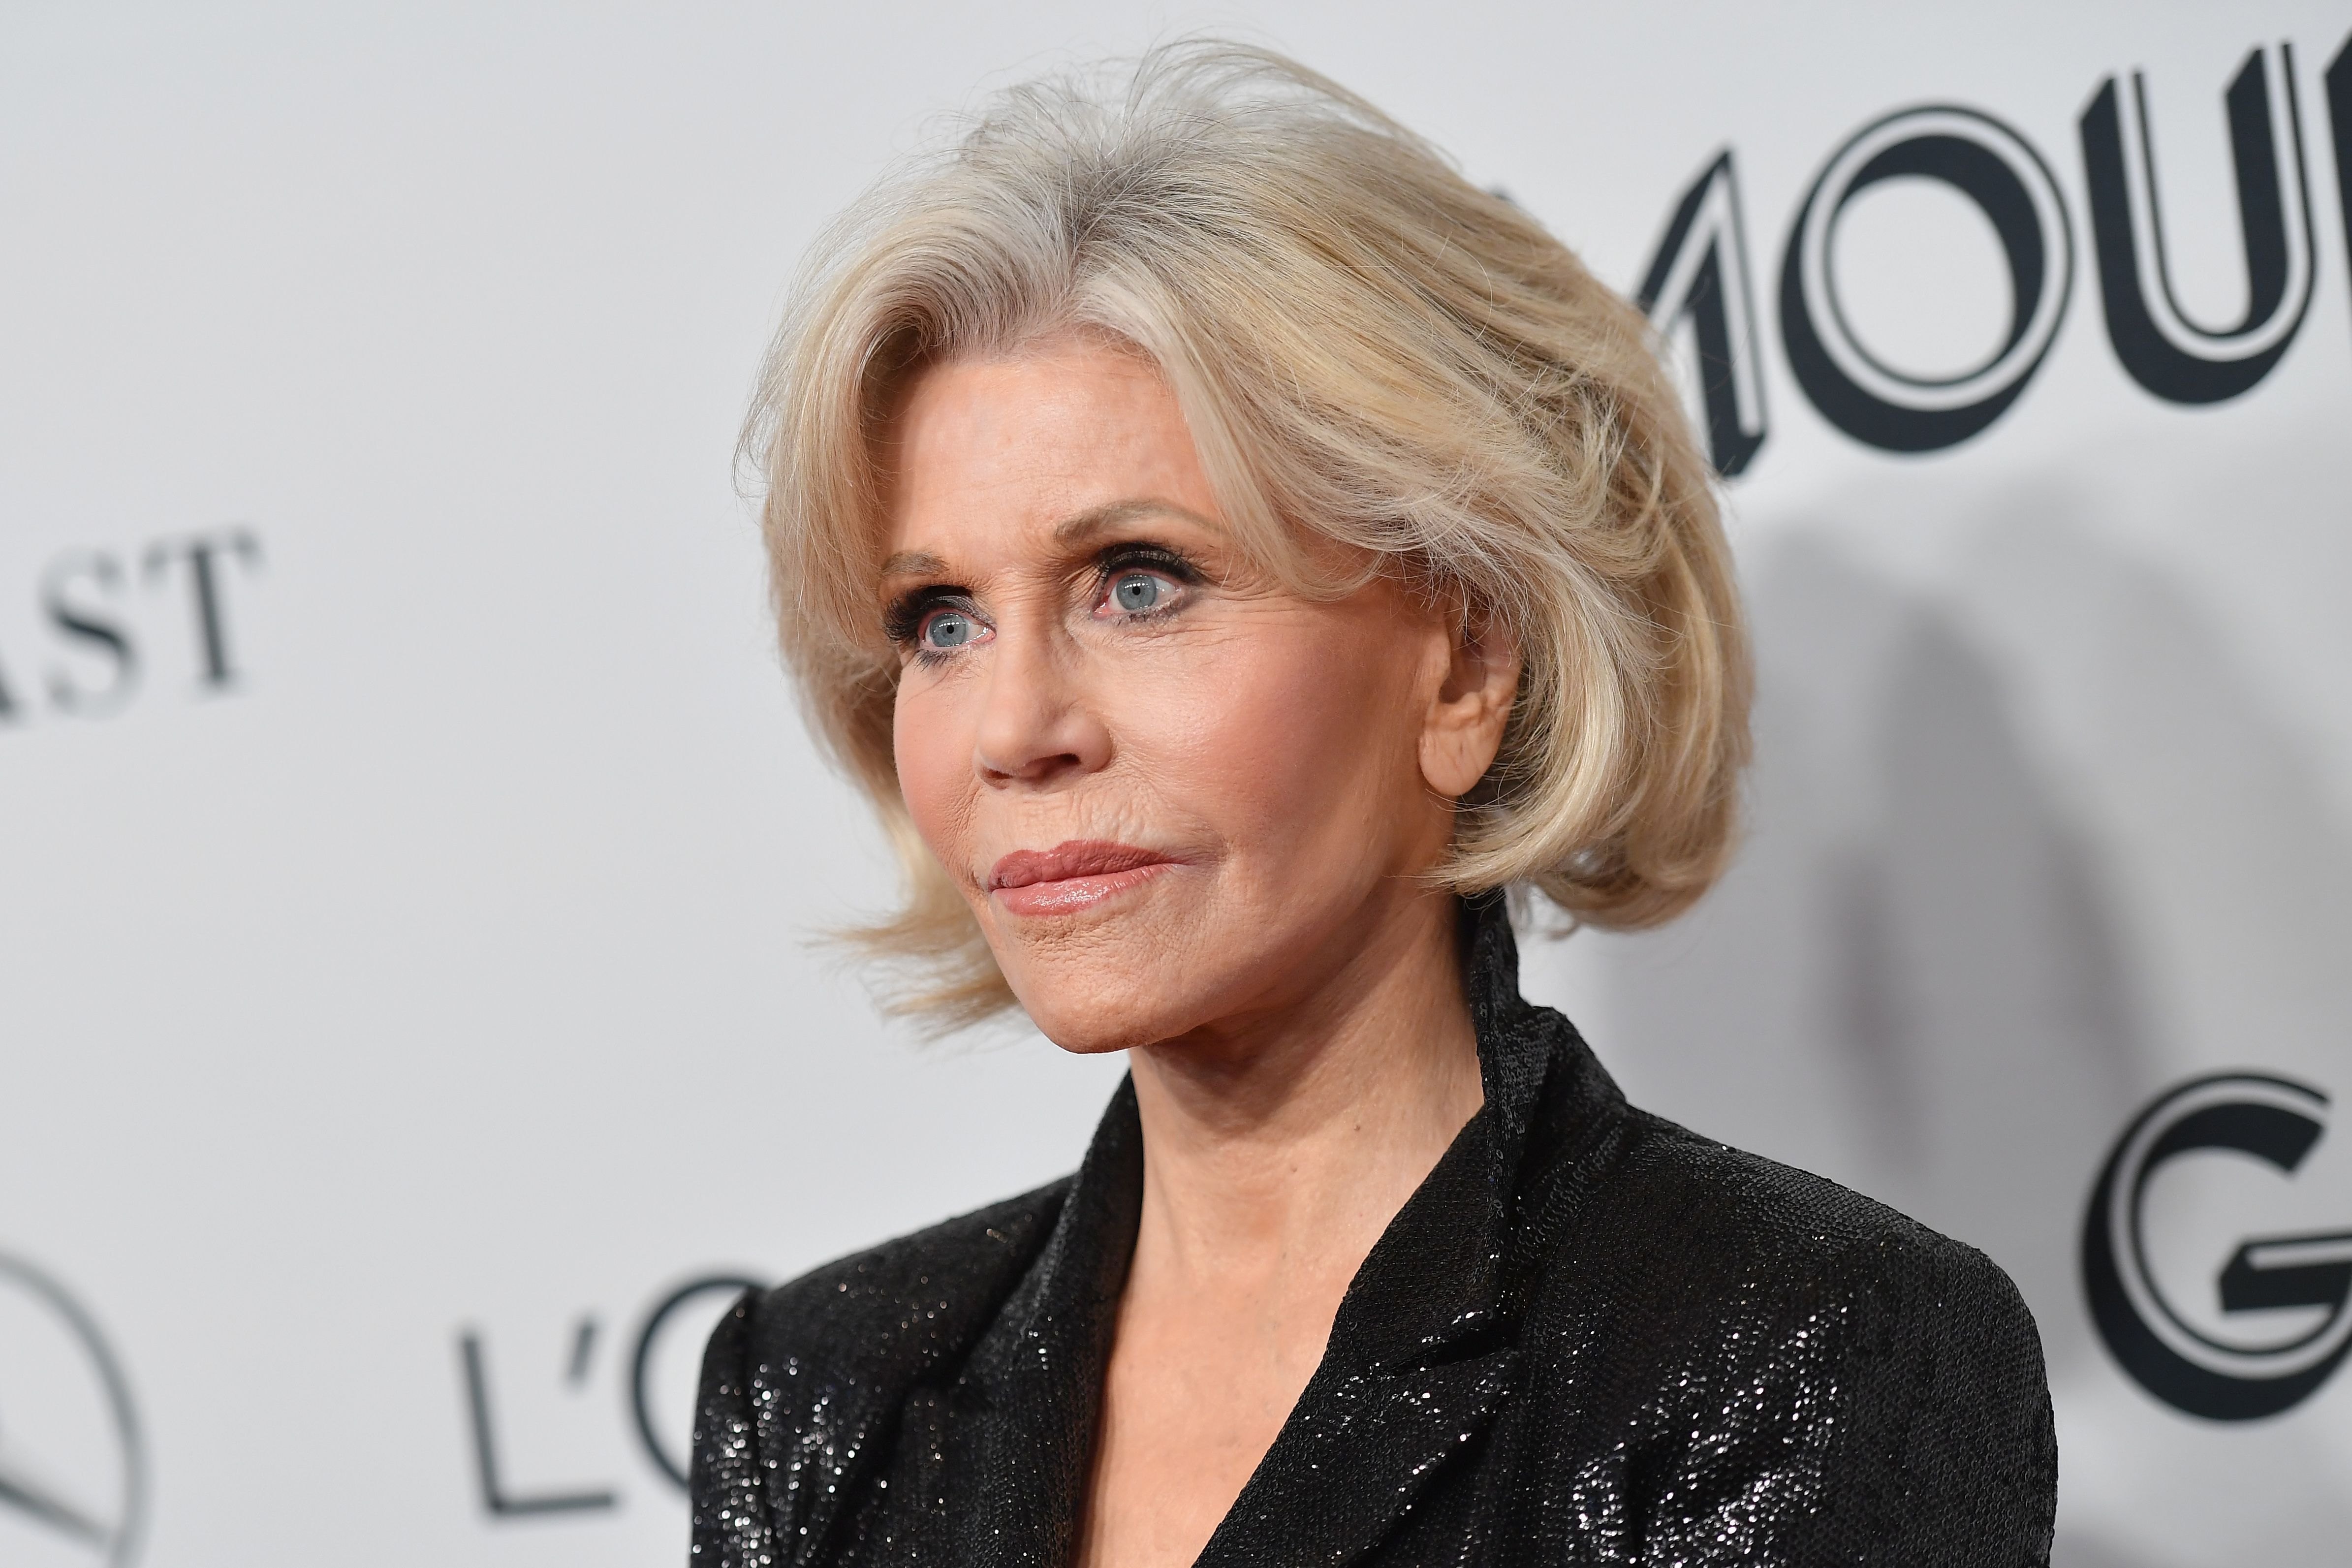 Jane Fonda during the 2019 Glamour Women Of The Year Awards at Alice Tully Hall, Lincoln Center on November 11, 2019 in New York City. | Source: Getty Images